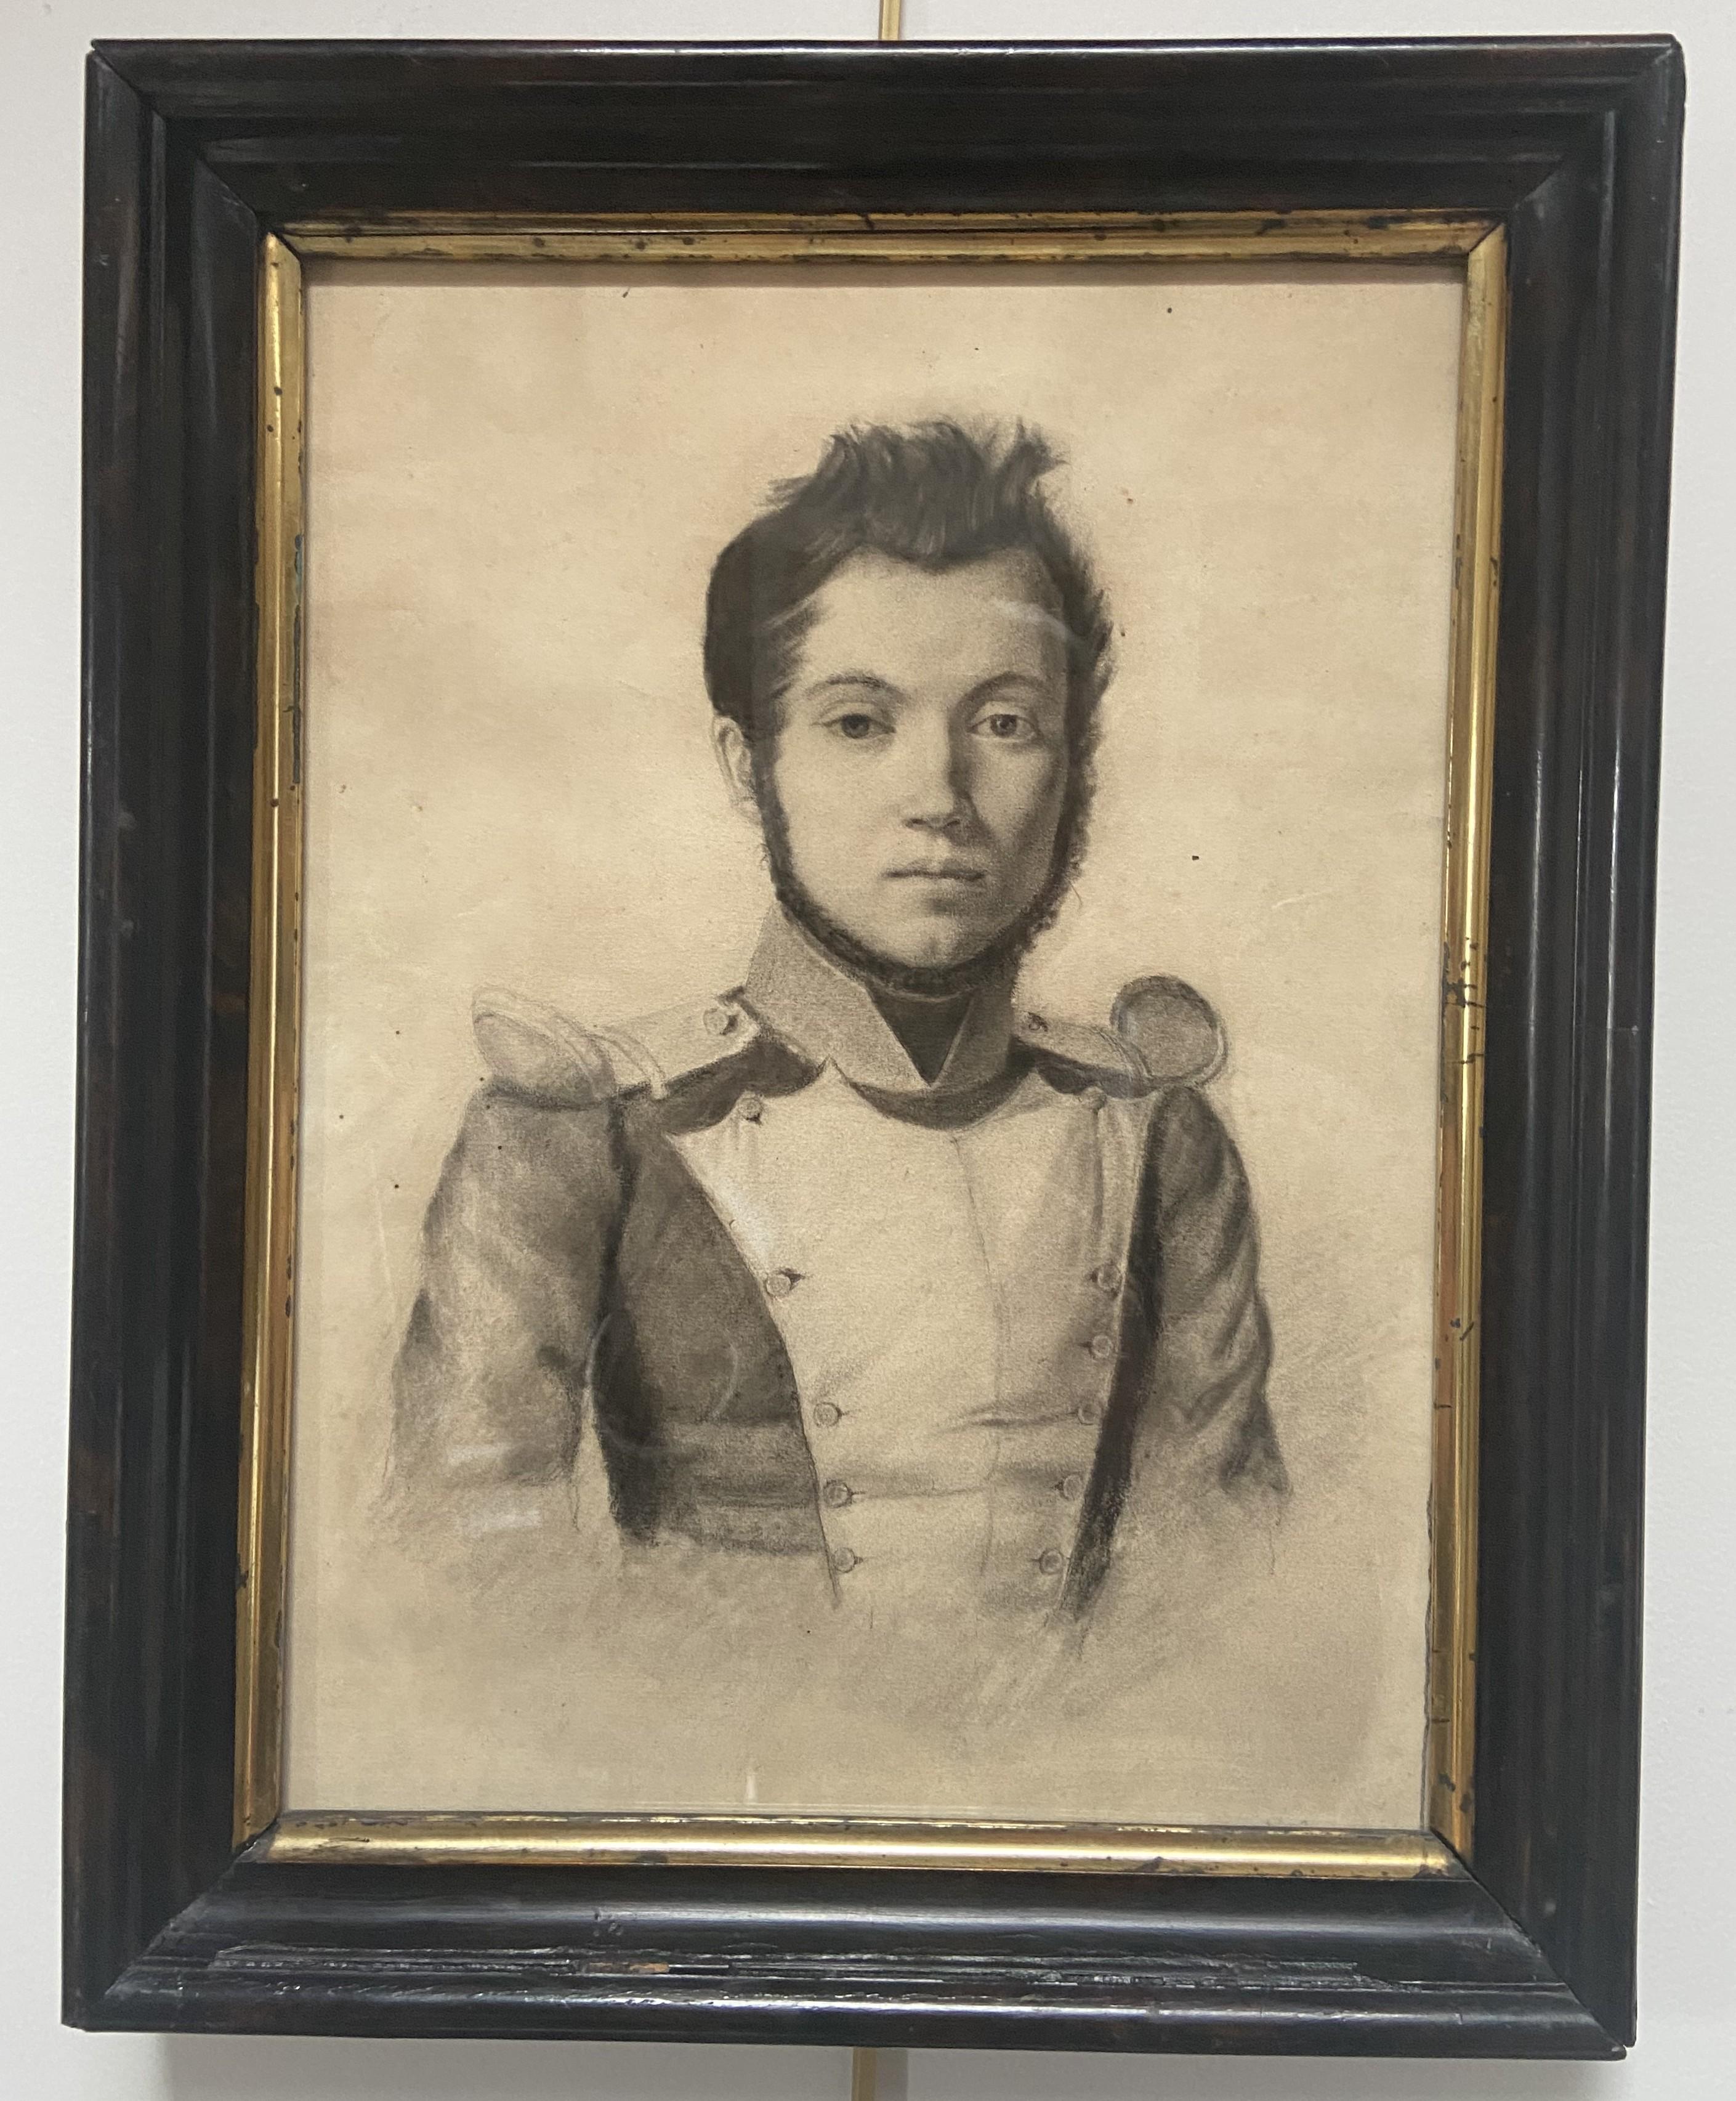 French Romantic school, circa 1830
Portrait of a young soldier, 
pencil on paper
Framed under glass : 38 x 30 cm
It's a vintage frame, probablly original but I had the back redone

The first part of the 19th century was a golden age for portraiture.